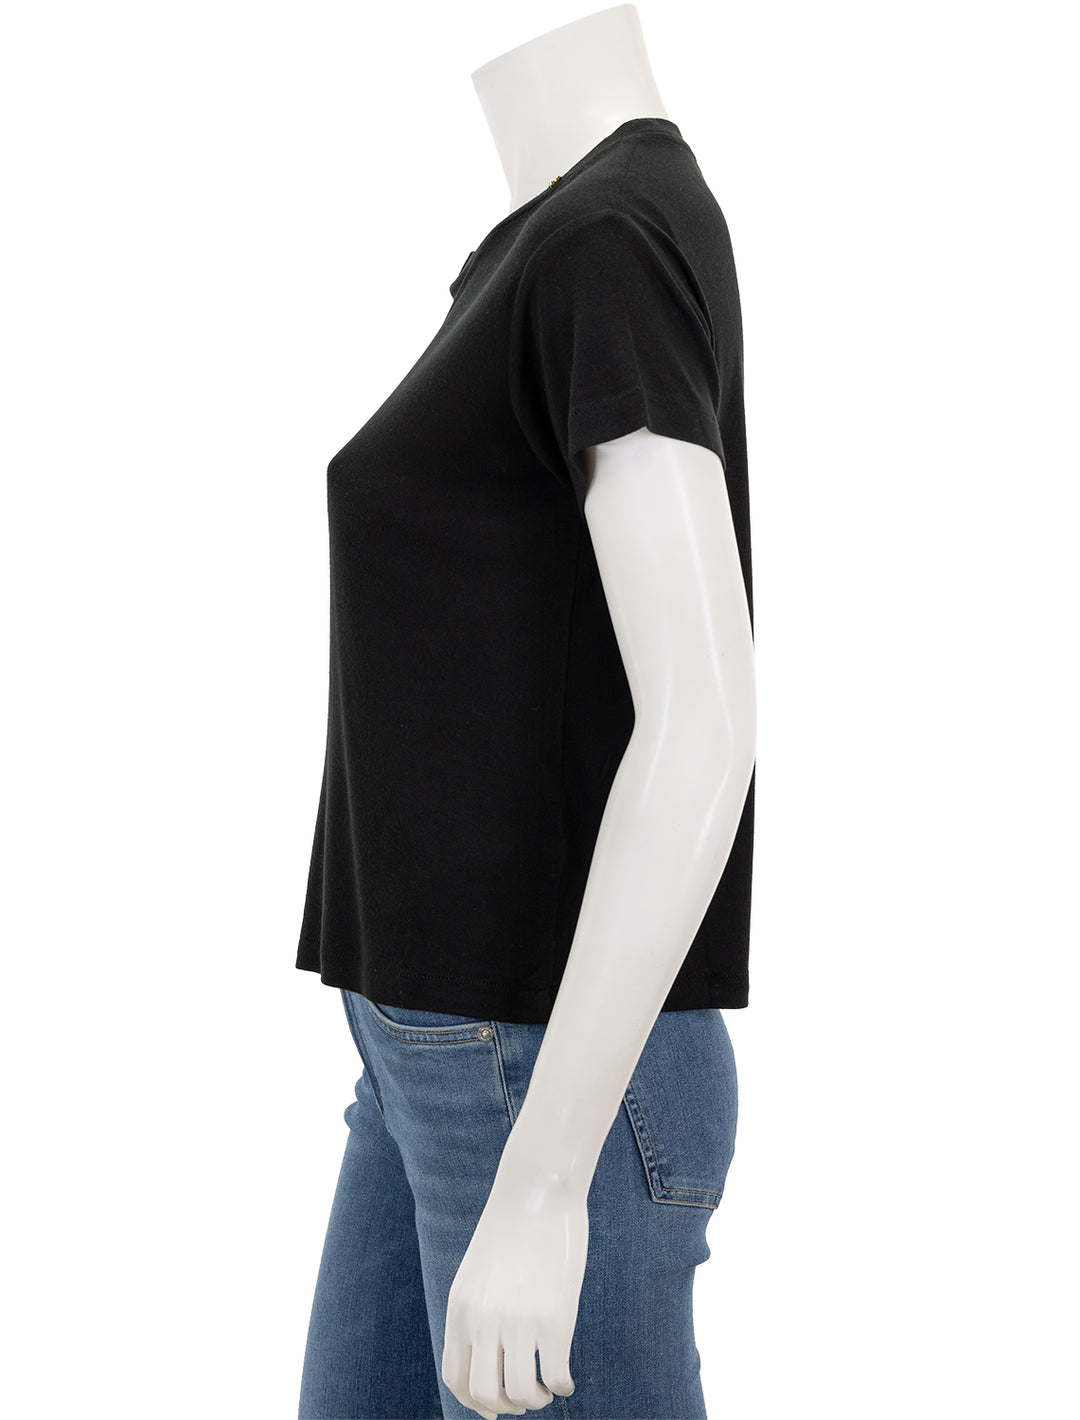 Side view of Anine Bing's amani tee in black.